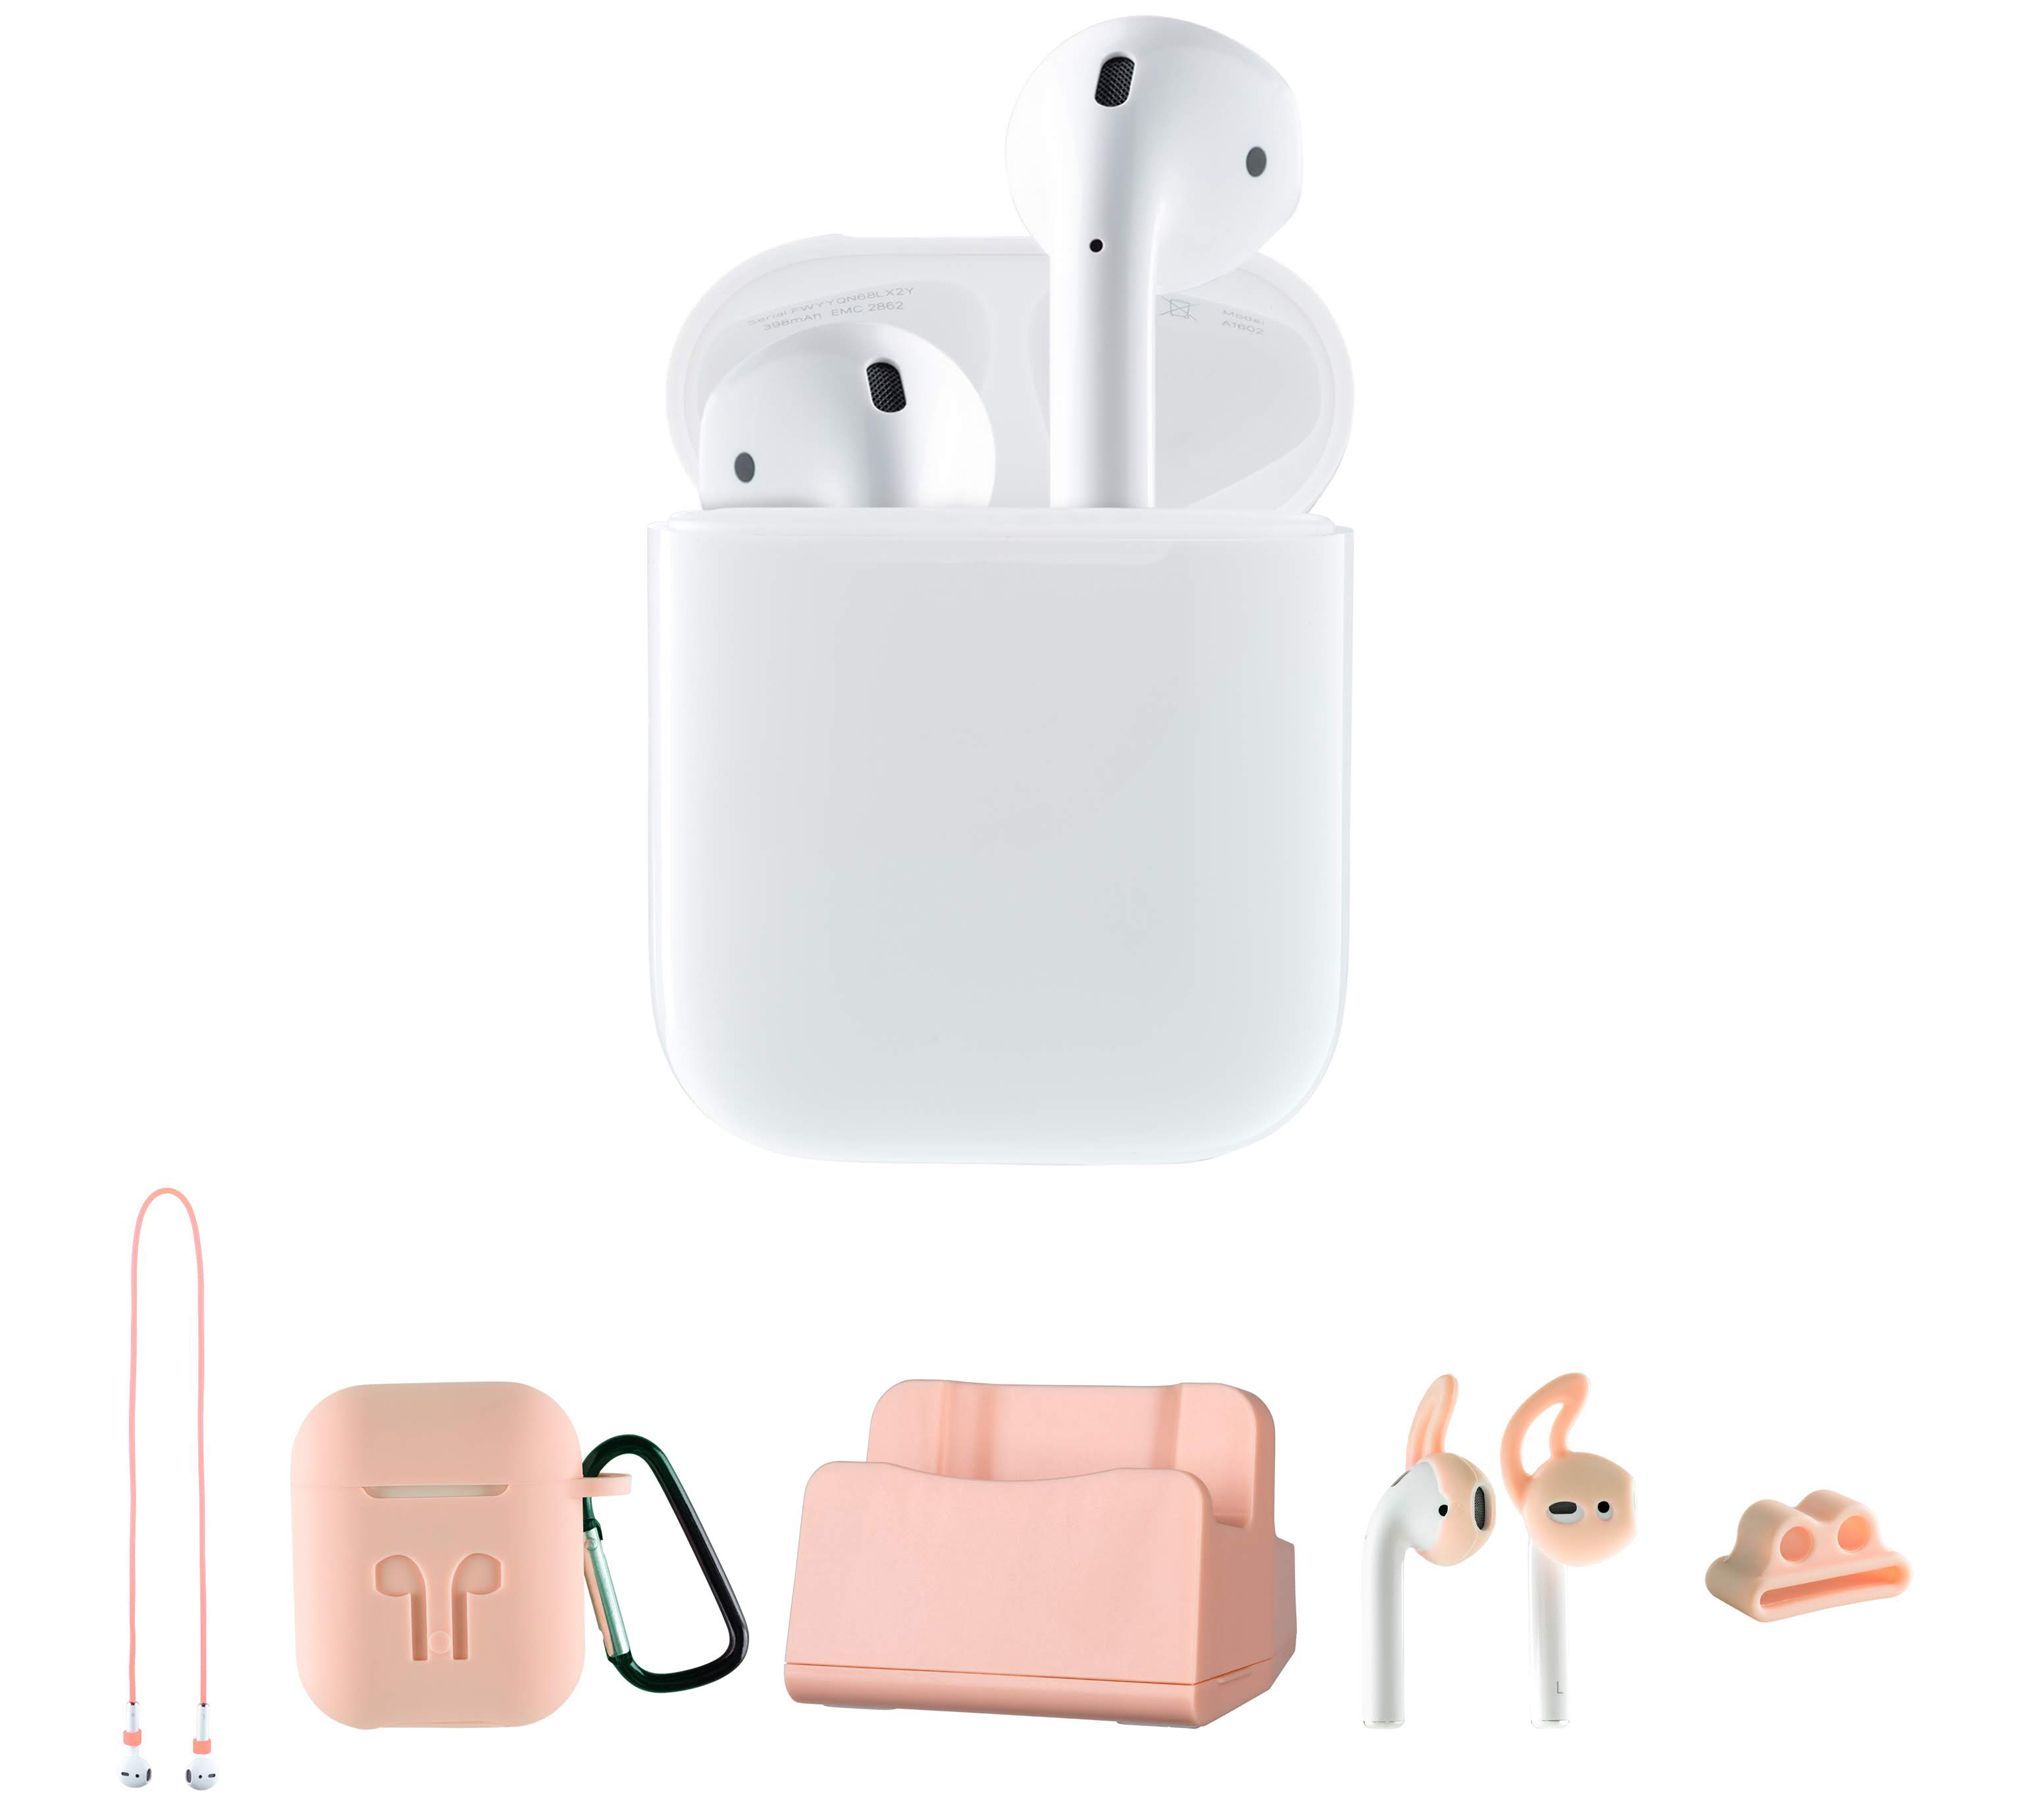 Apple Airpods 2nd Generation with Charging Case and Accessories | QVC